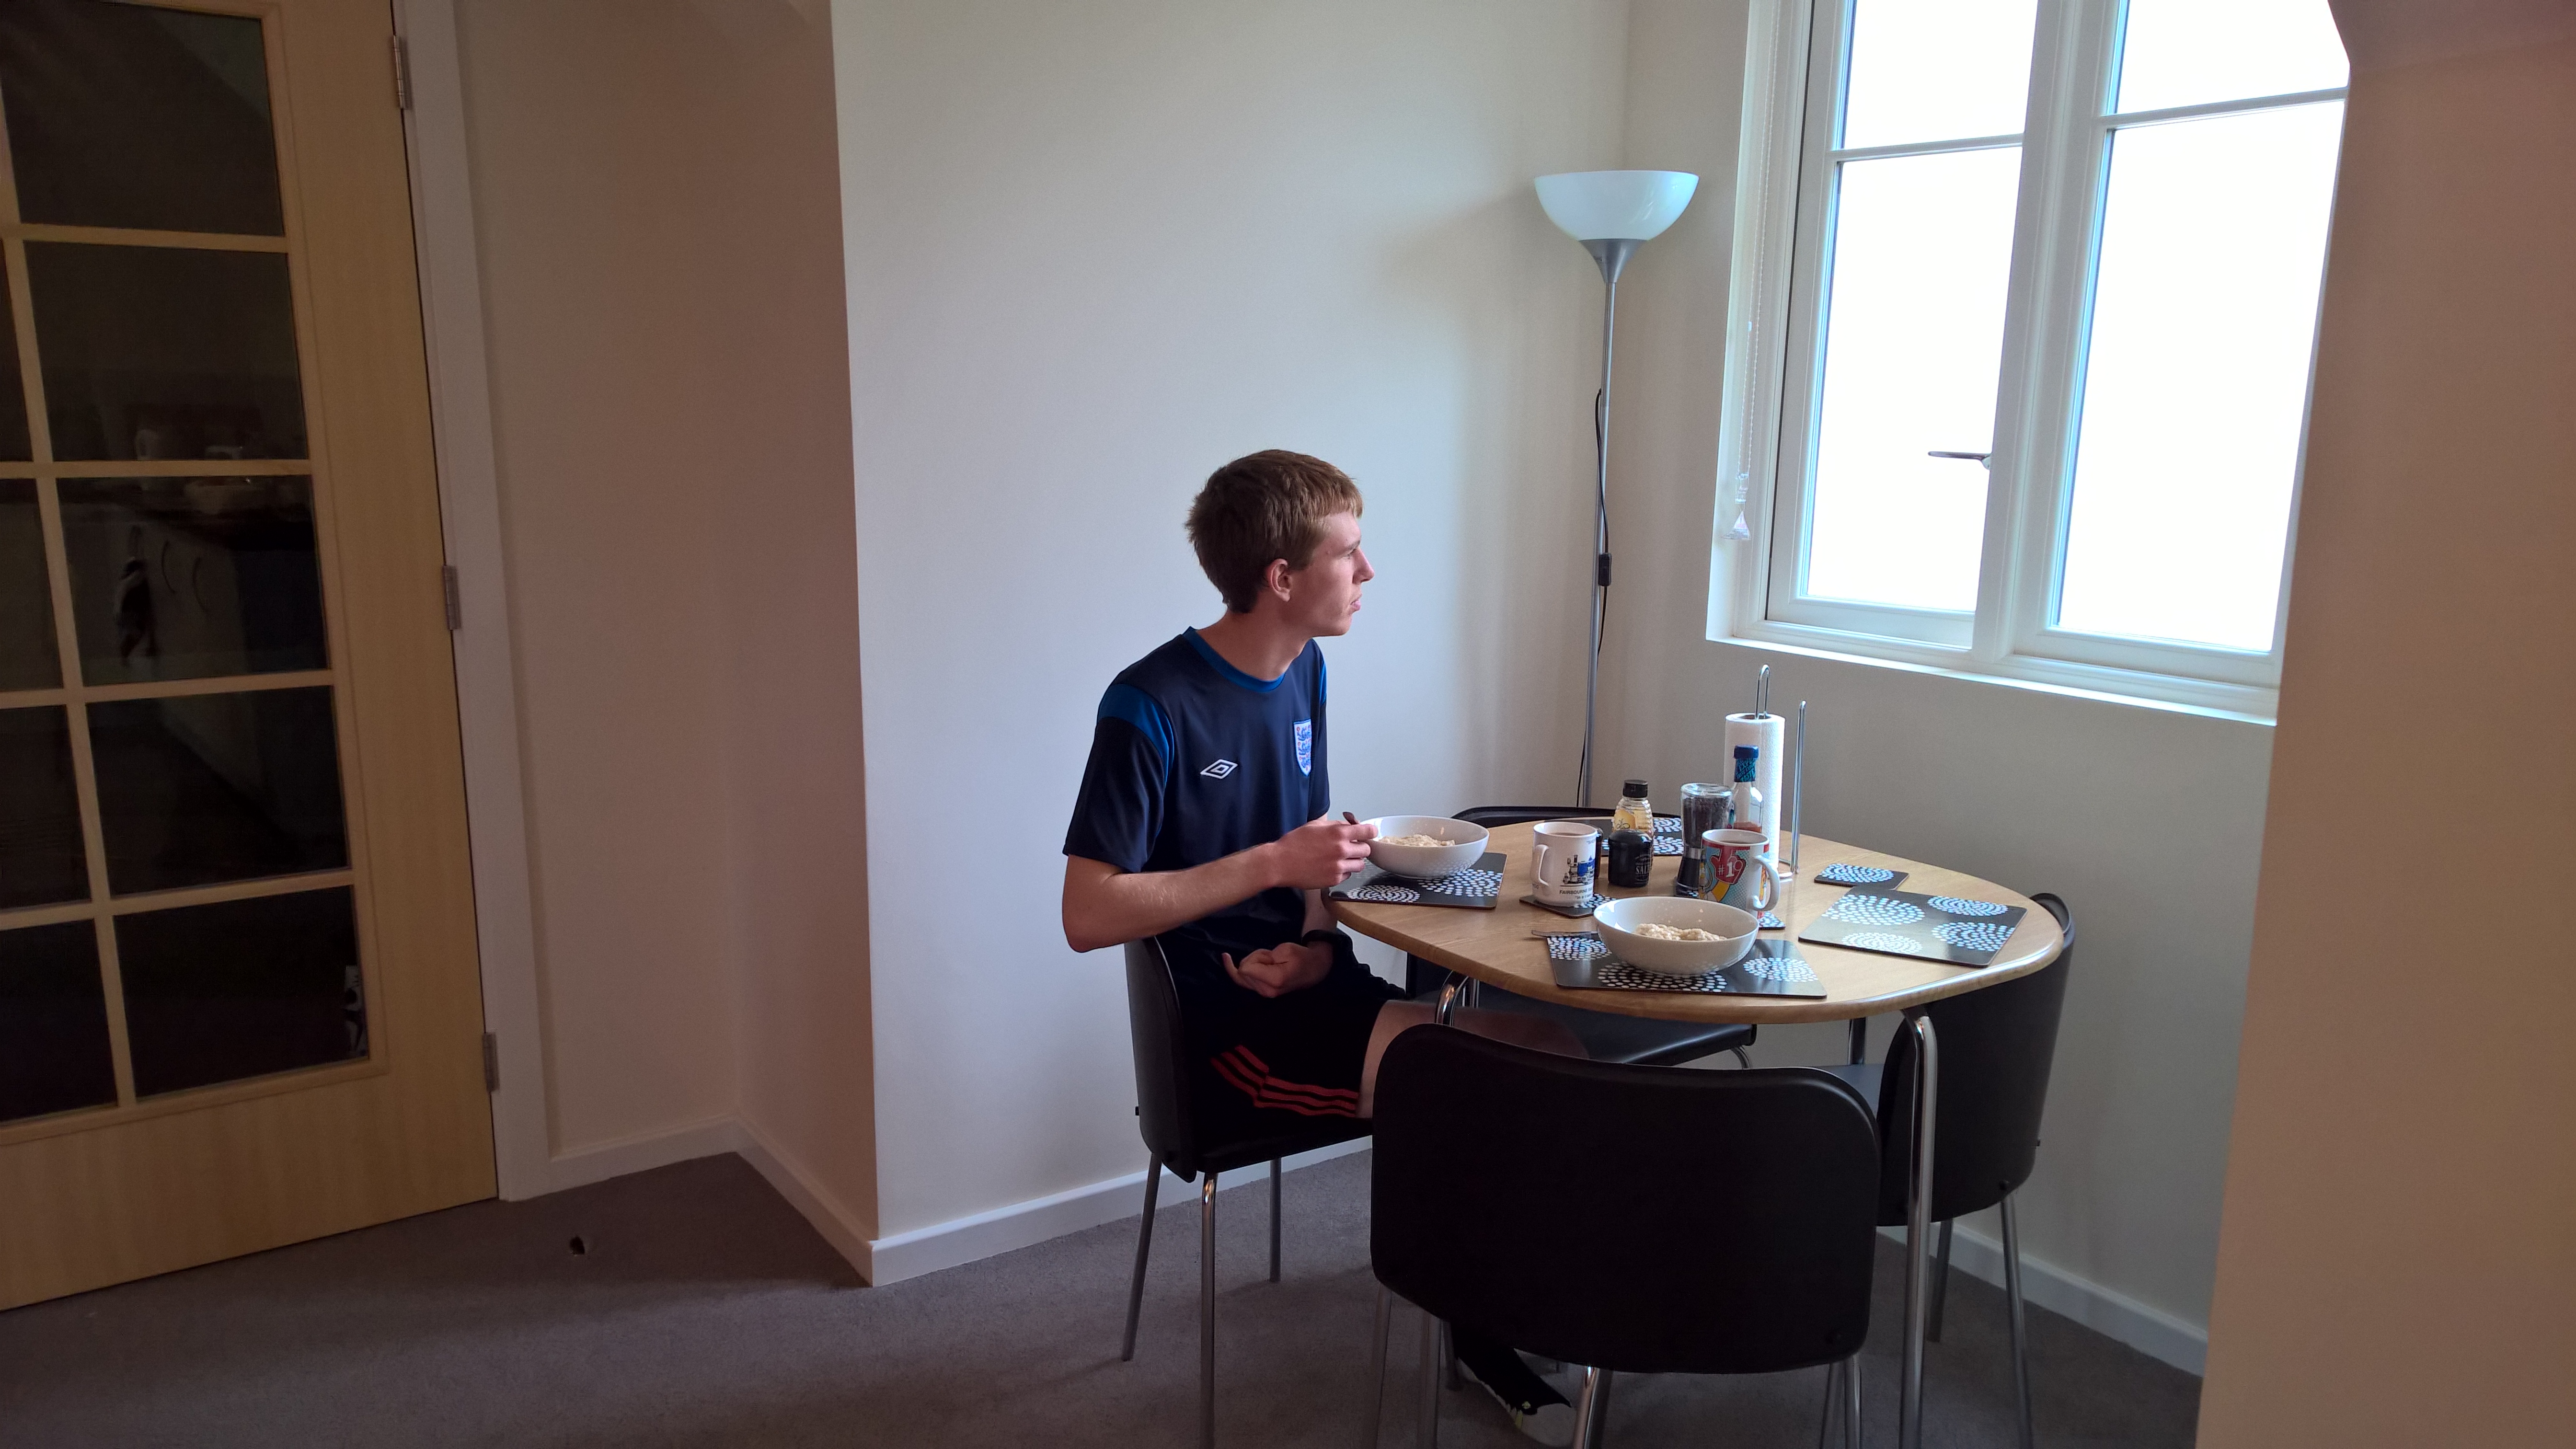 Daniel has breakfast in his apartment on the outskirts of London. (Photo courtesy of Wolff family)